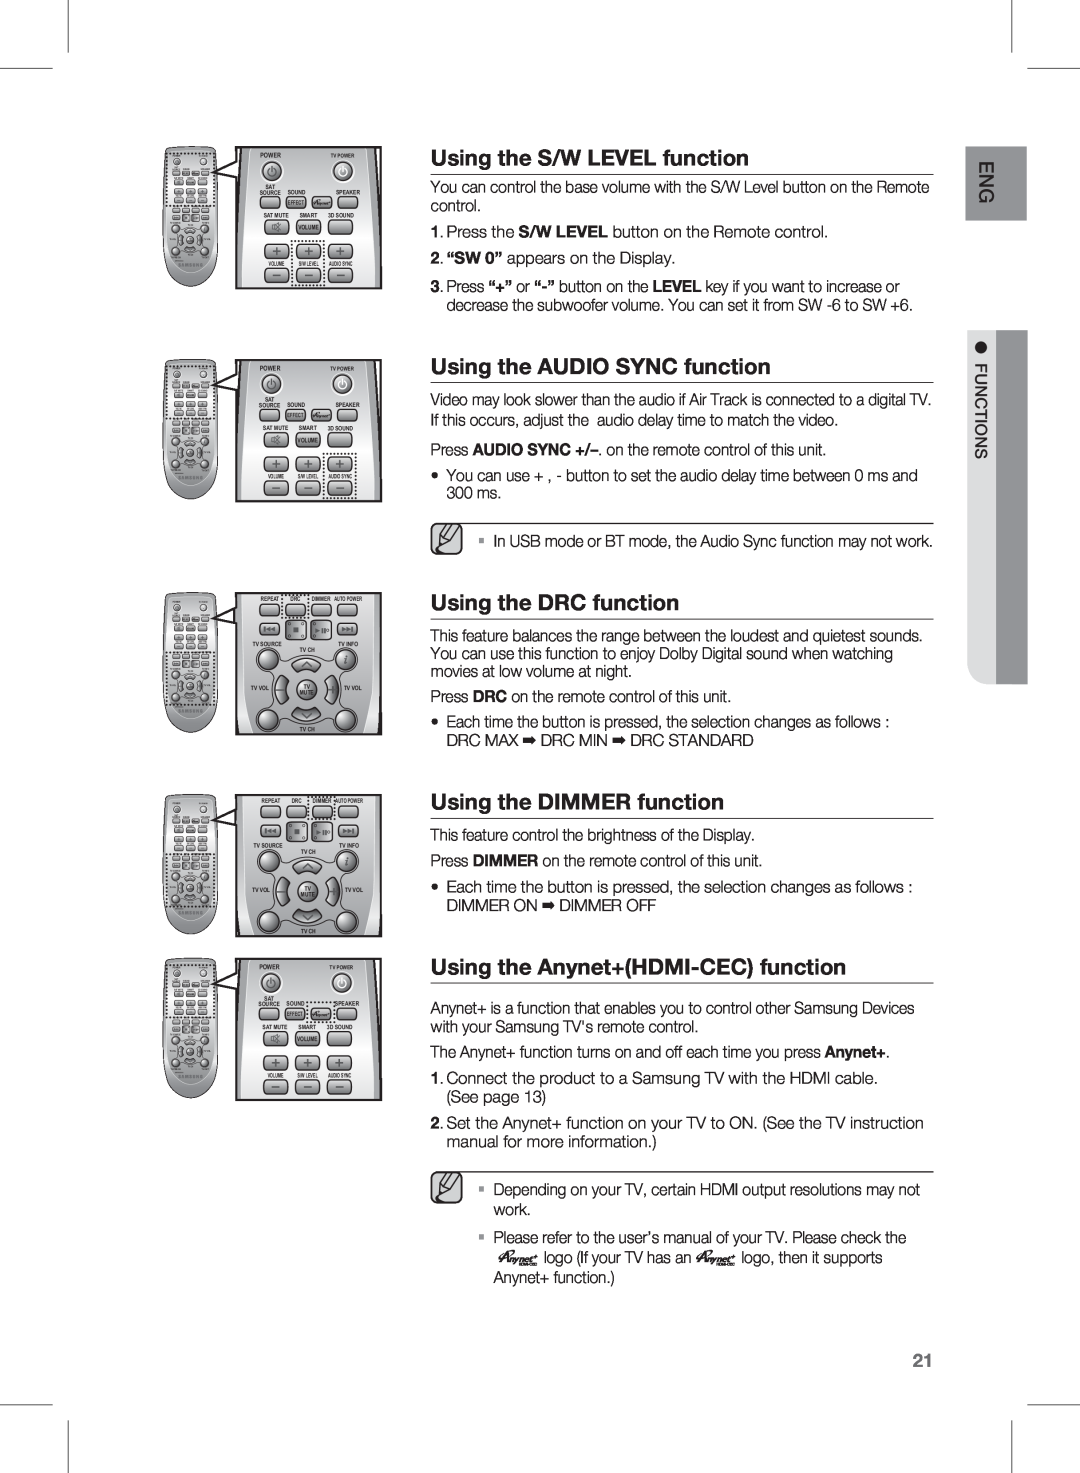 Samsung HW-E450C user manual Using the S/W LEVEL function, Using the AUDIO SYNC function, Using the DRC function 